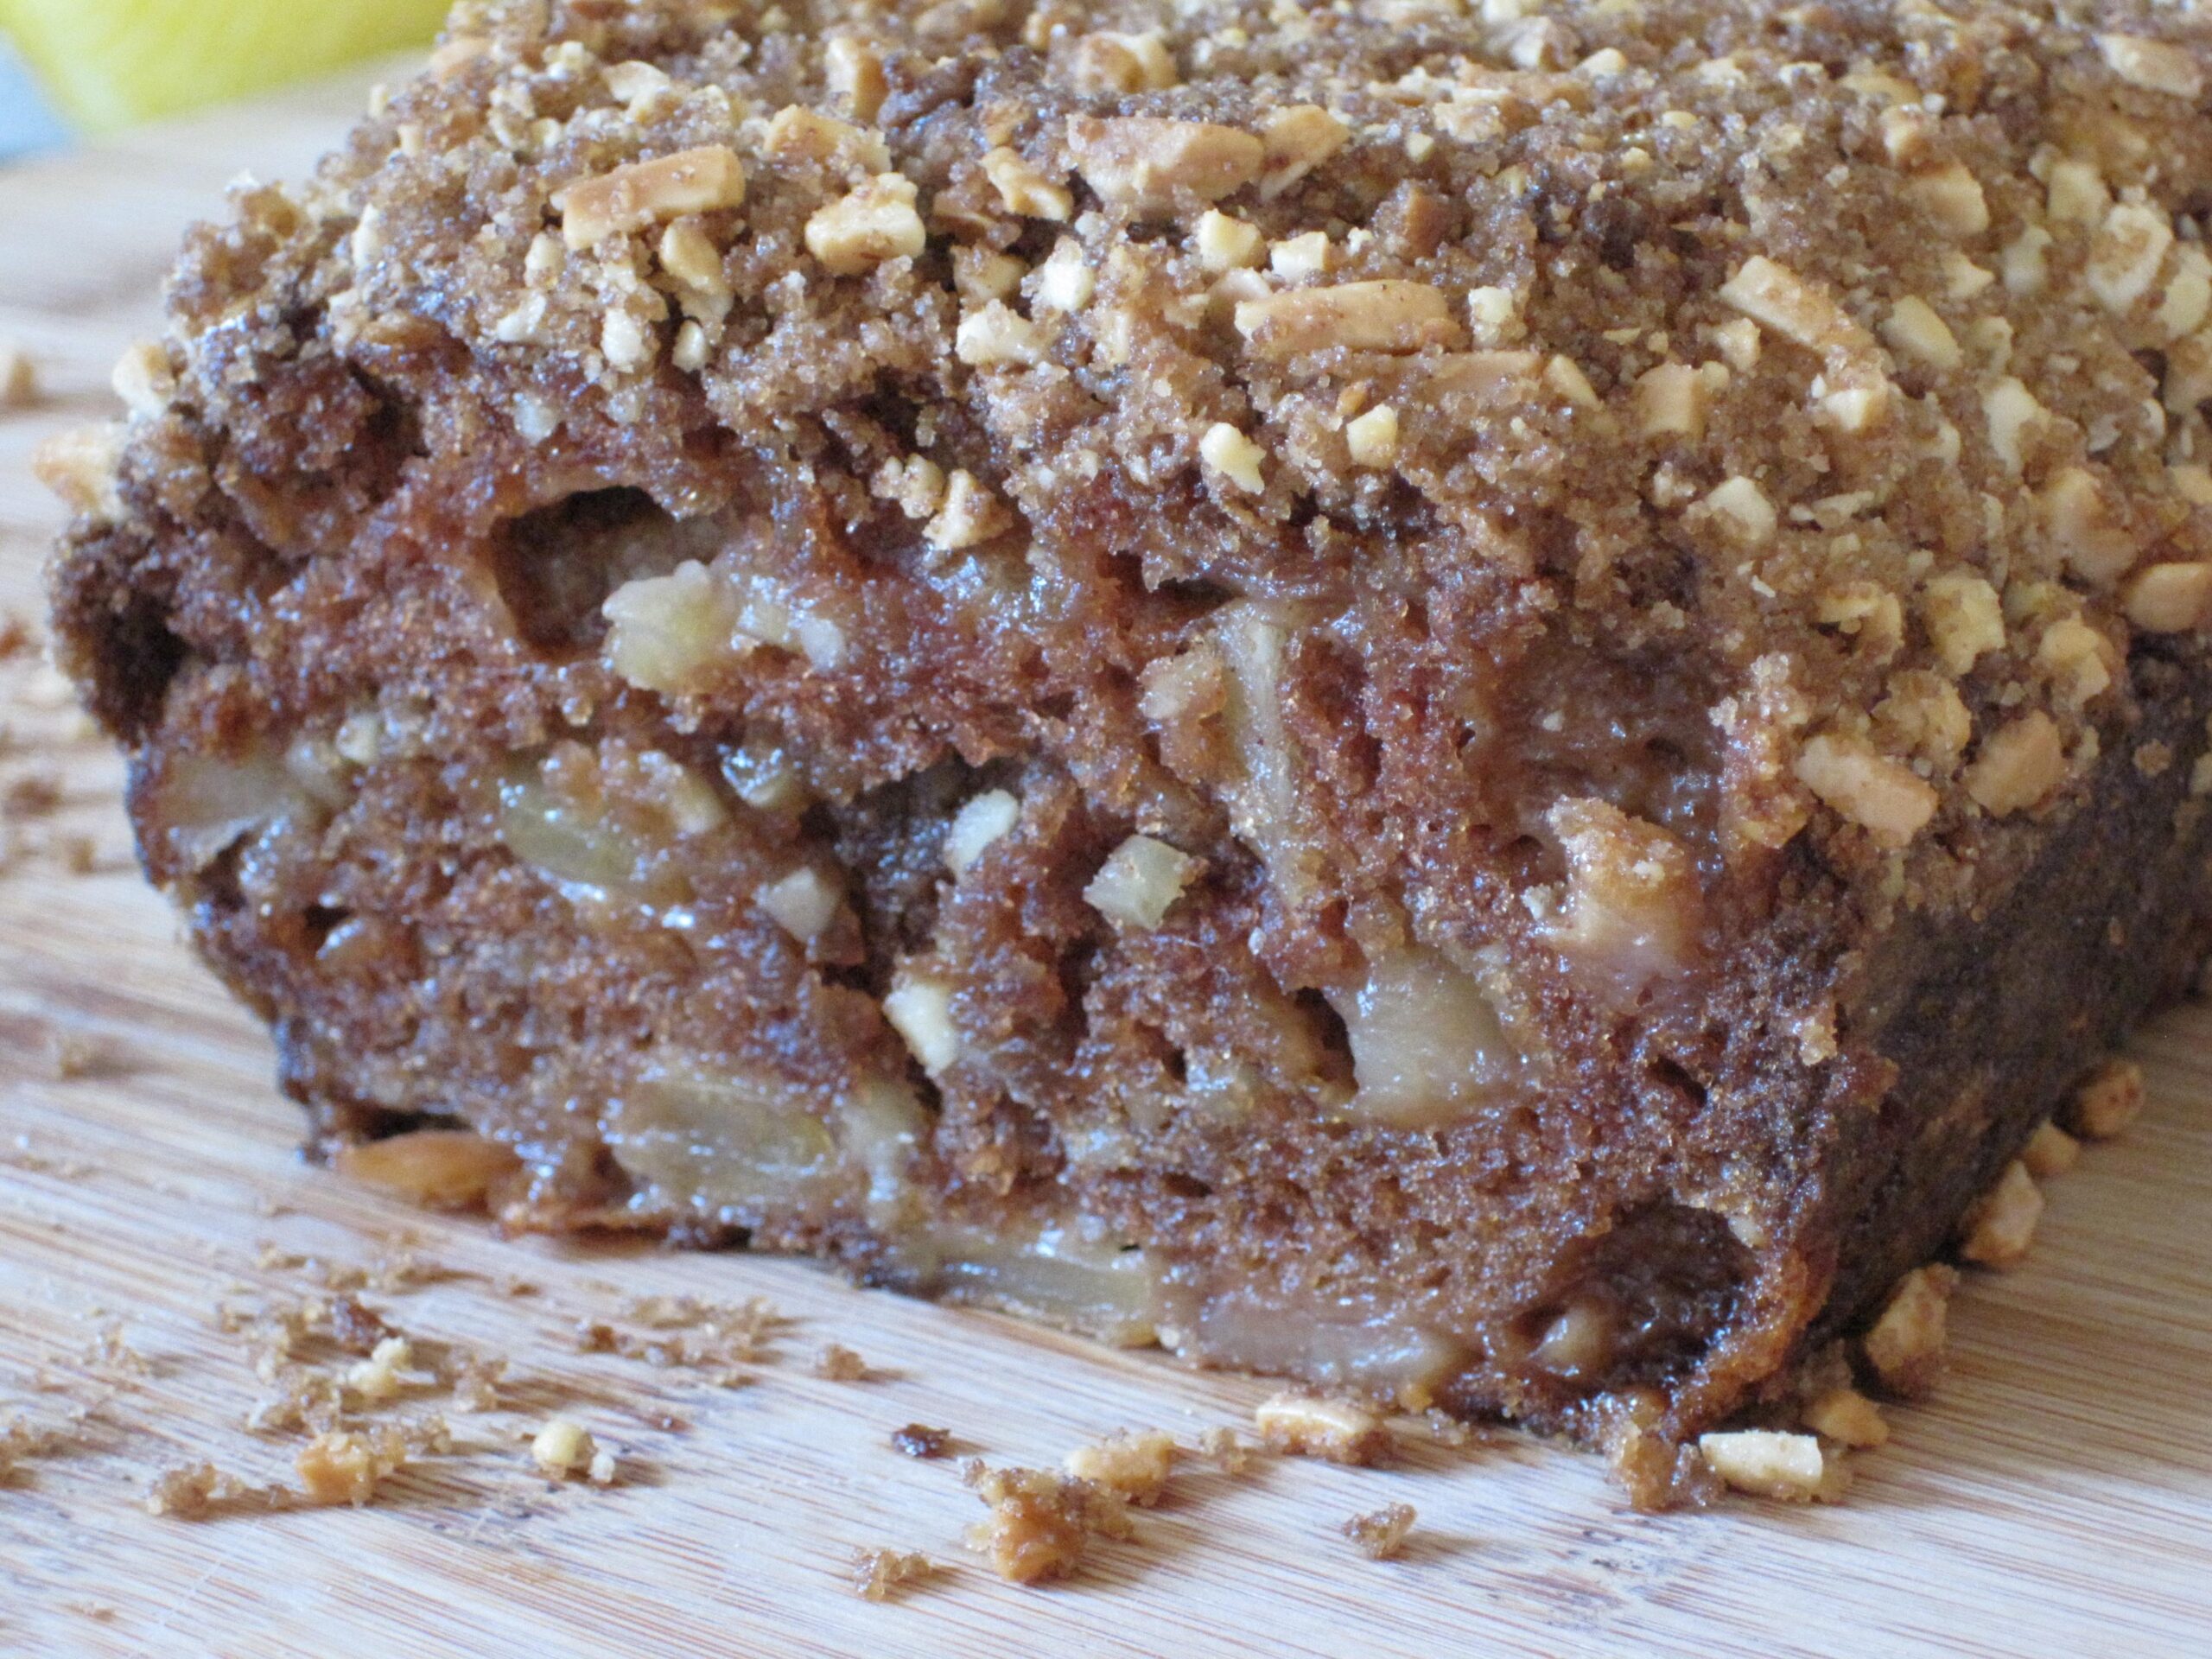  What's better than a warm and fresh gluten-free cake? A Pecan Apple Strudel Cake, of course!